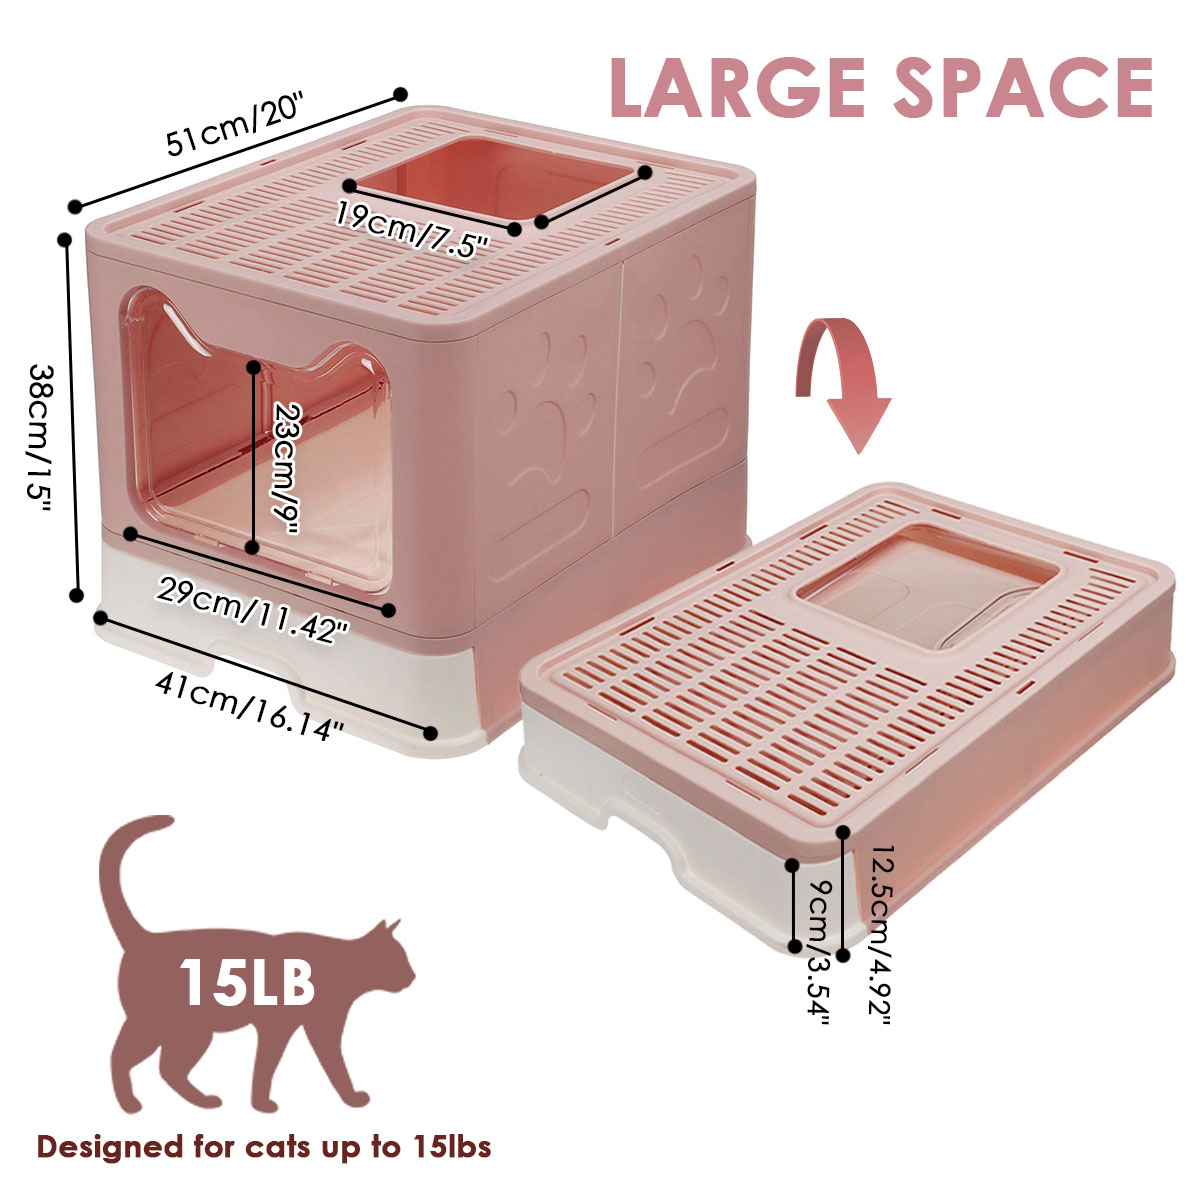 Hooded-Cat-Litter-Box-Enclosed-Large-Kitty-Toilet-Litter-Scoop-With-shovel-Foldable-Tray-Disassemble-1958677-5